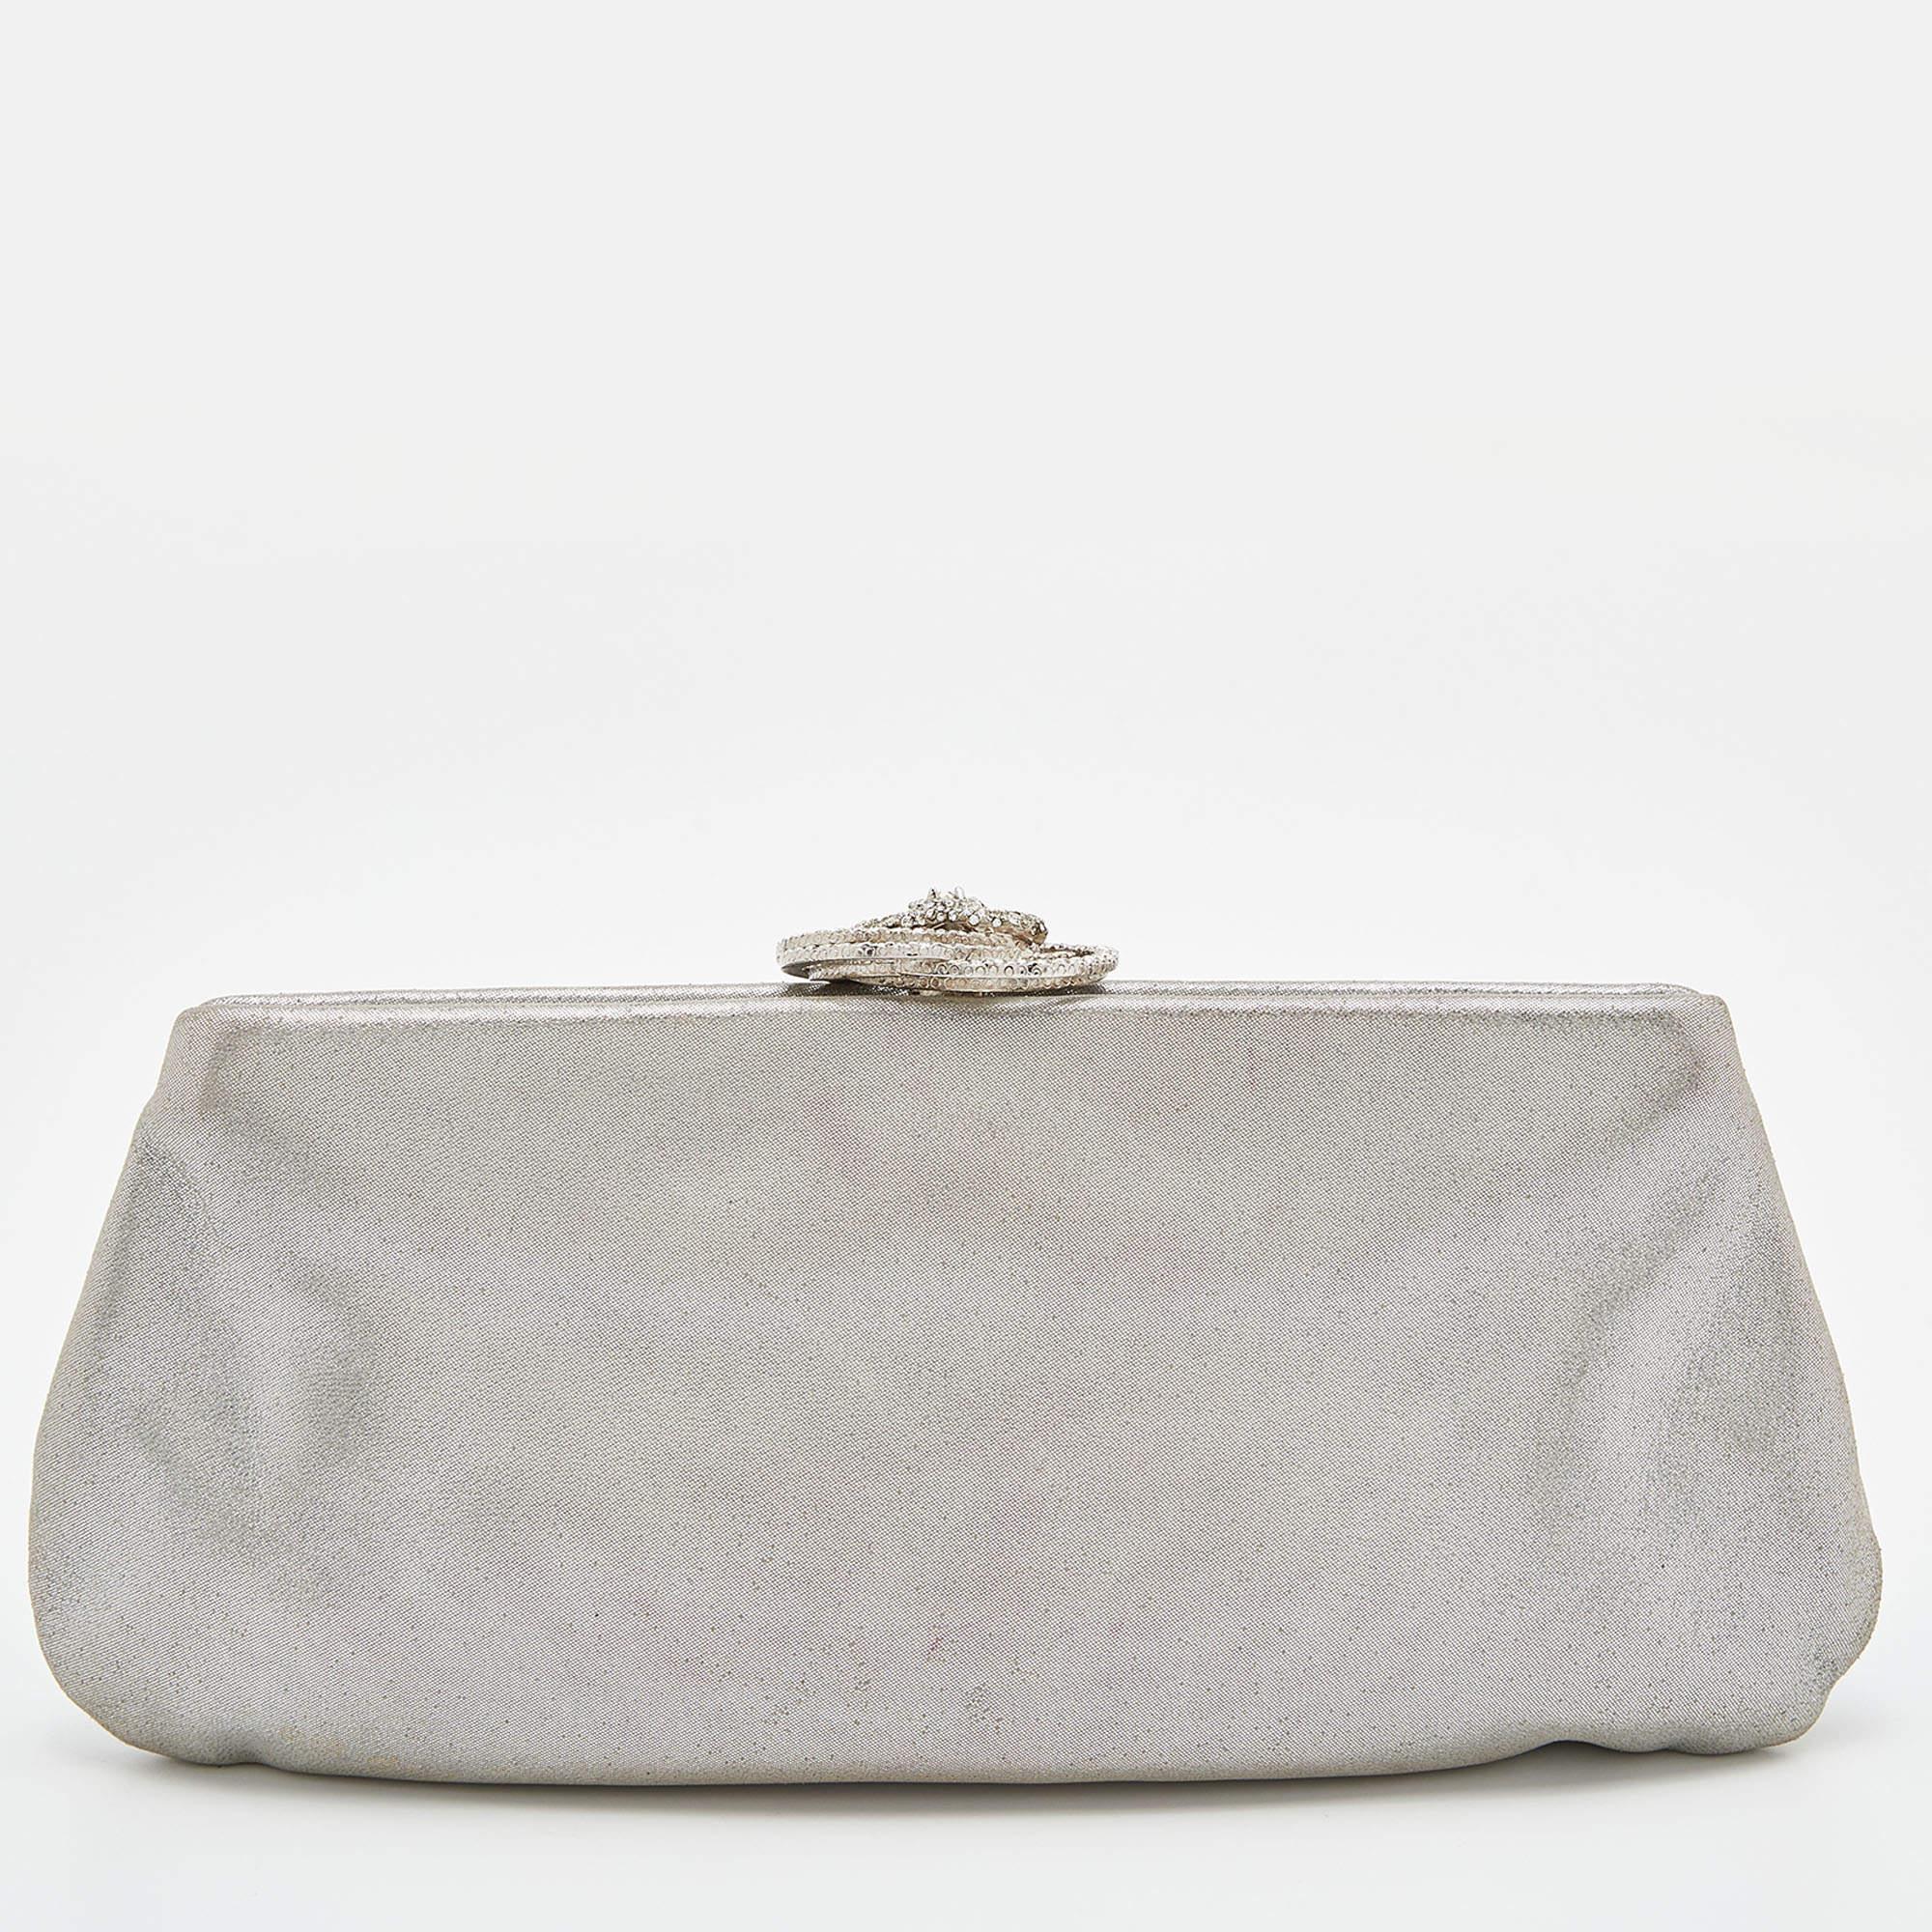 Functional and fashionable, this clutch is a classy styling choice. It is crafted from quality materials, and its lined interior will keep your evening essentials in a neat way.

Includes: Original Dustbag
